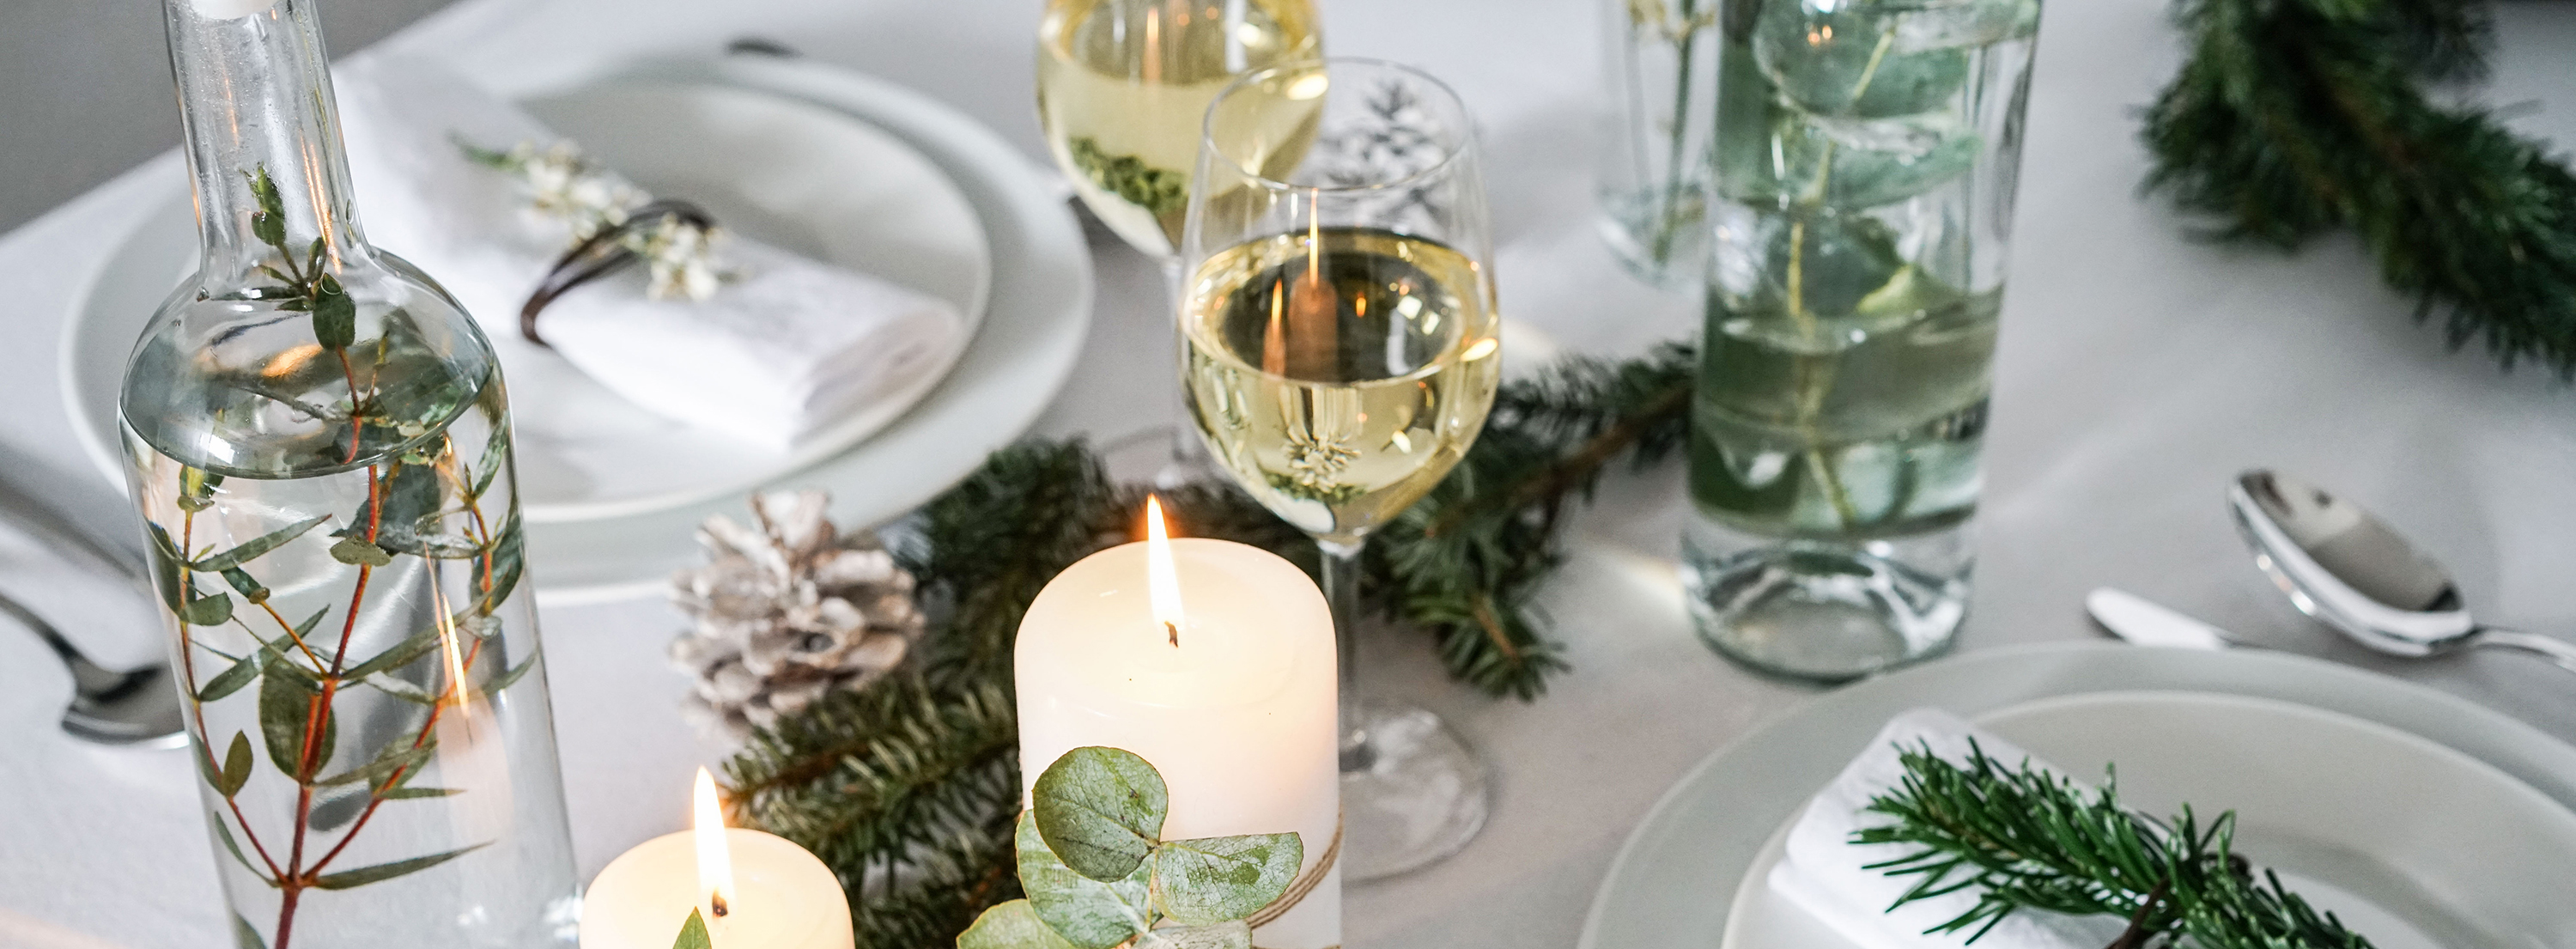 Nature inspired DIY Christmas table decorations